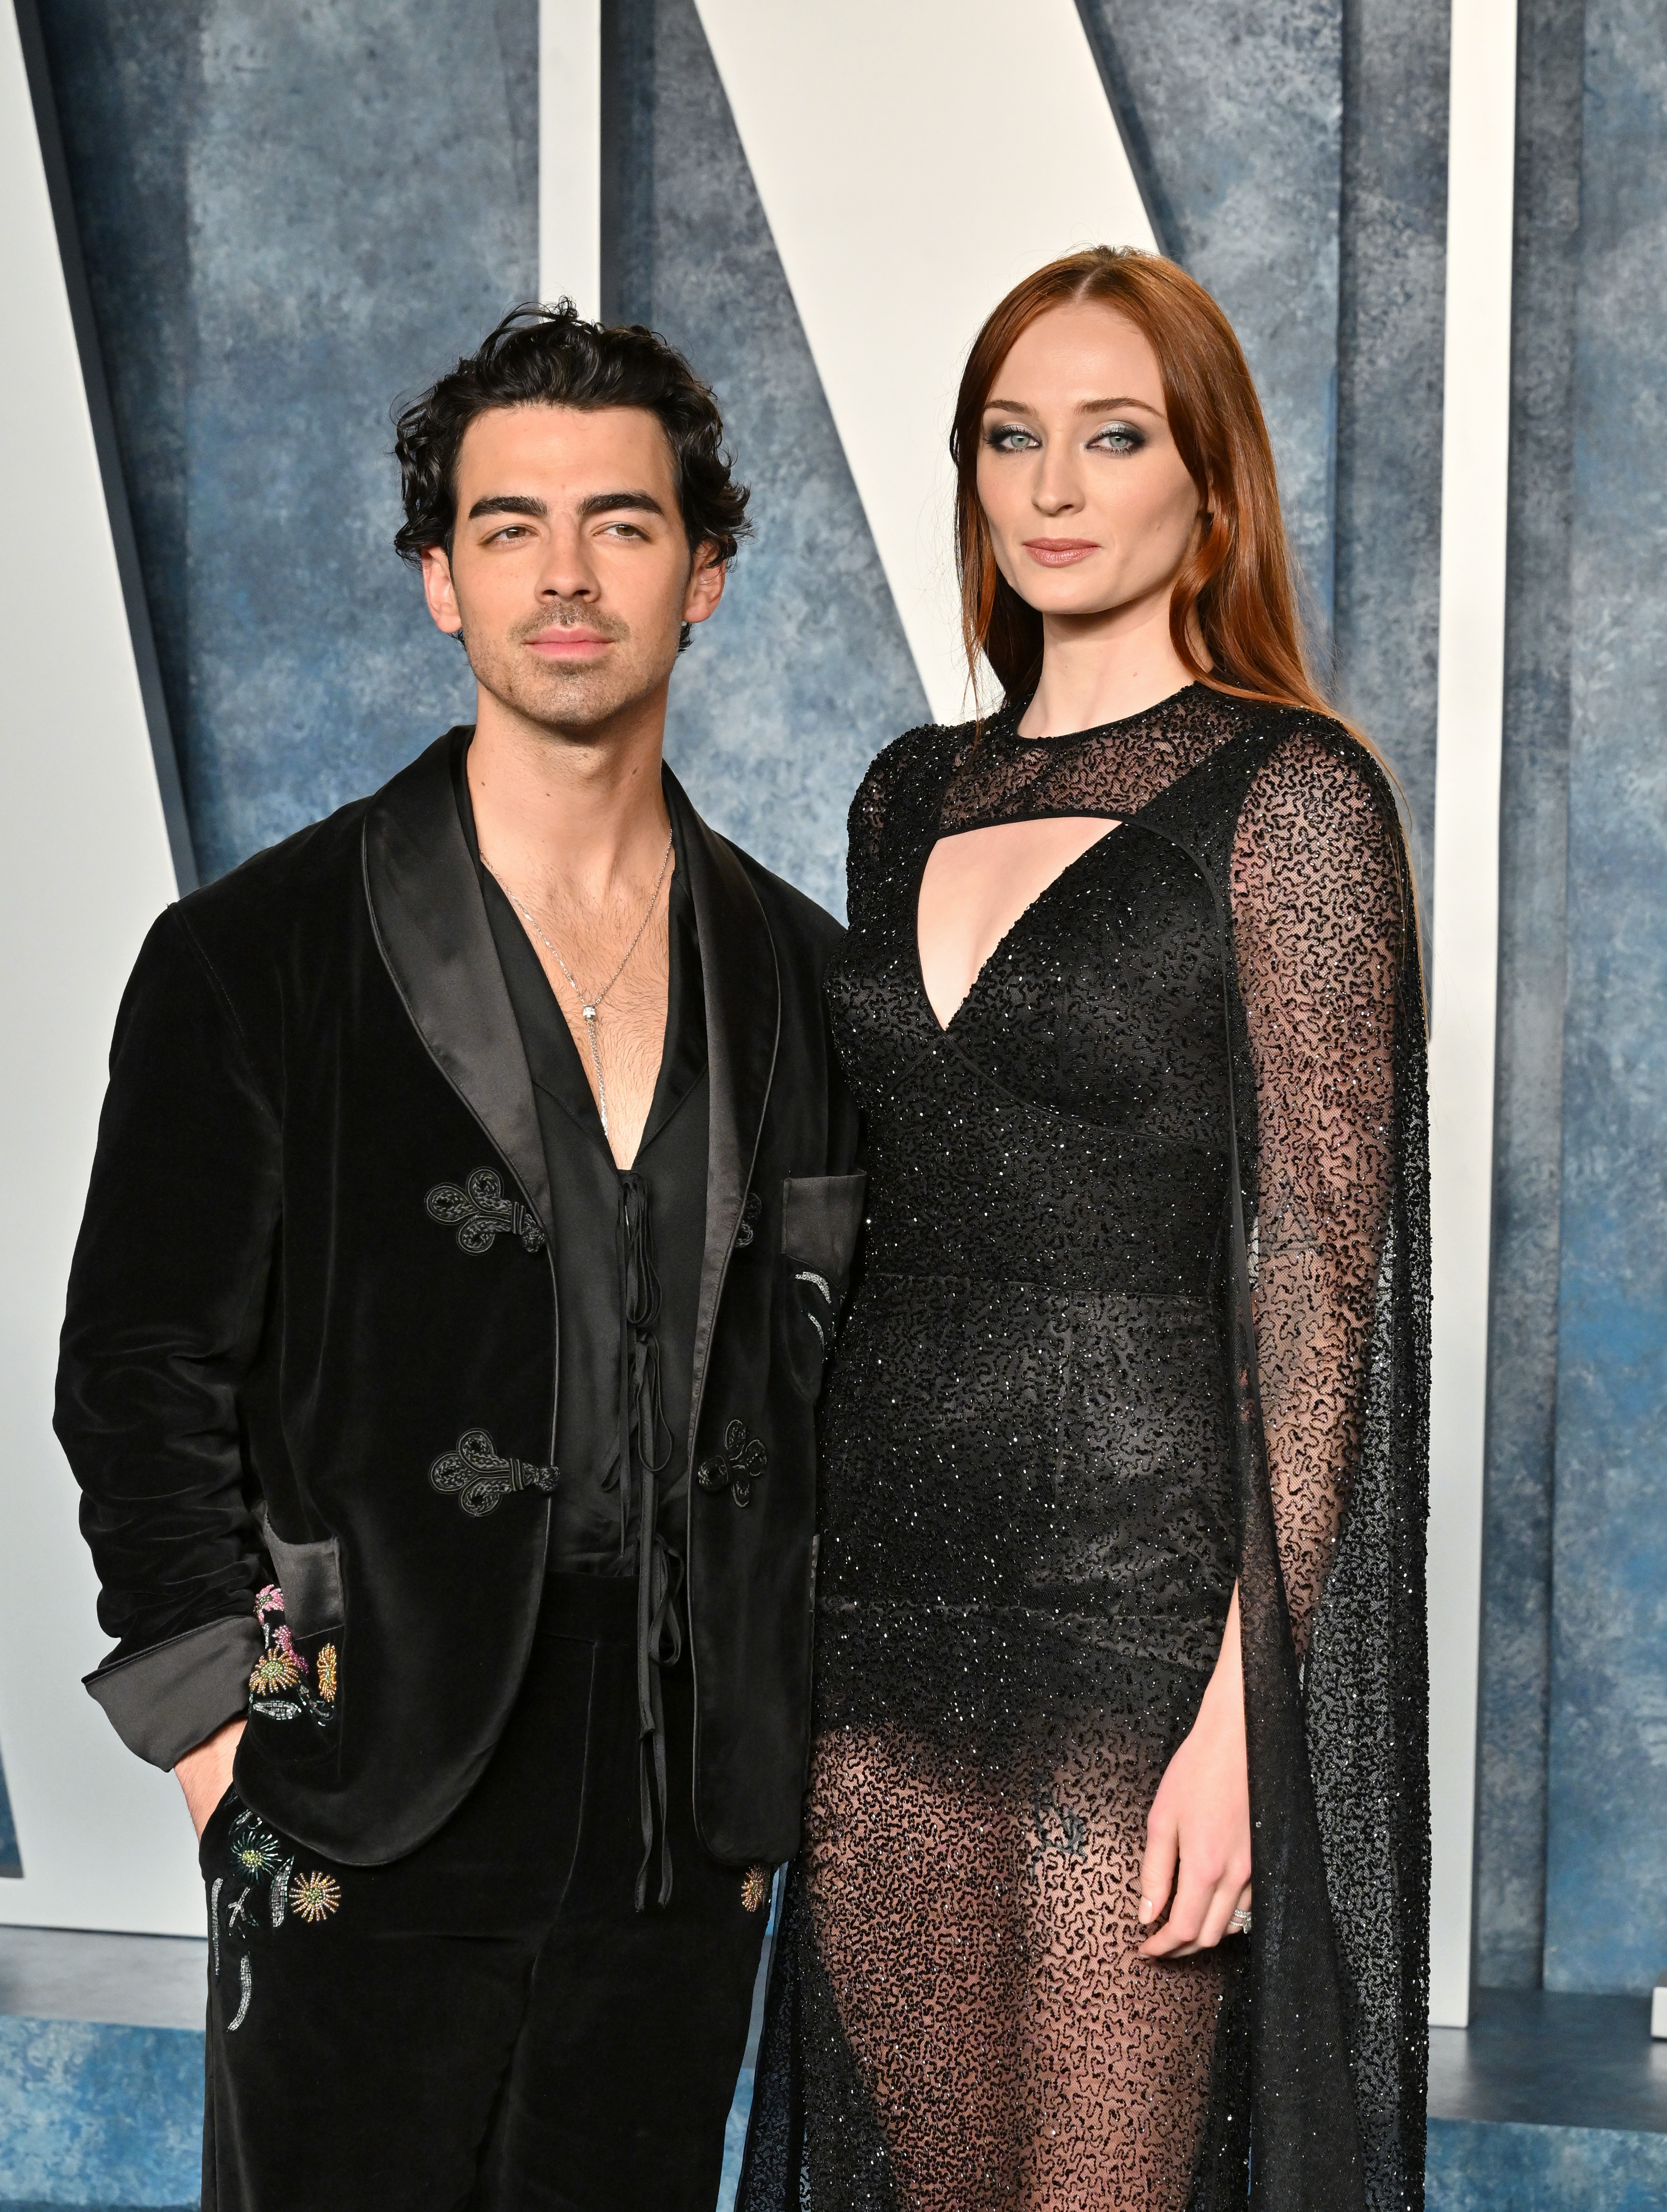 Joe Jonas and Sophie Turner at the 2023 Vanity Fair Oscar Party hosted by Radhika Jones in Beverly Hills, California on March 12, 2023 | Source: Getty Images